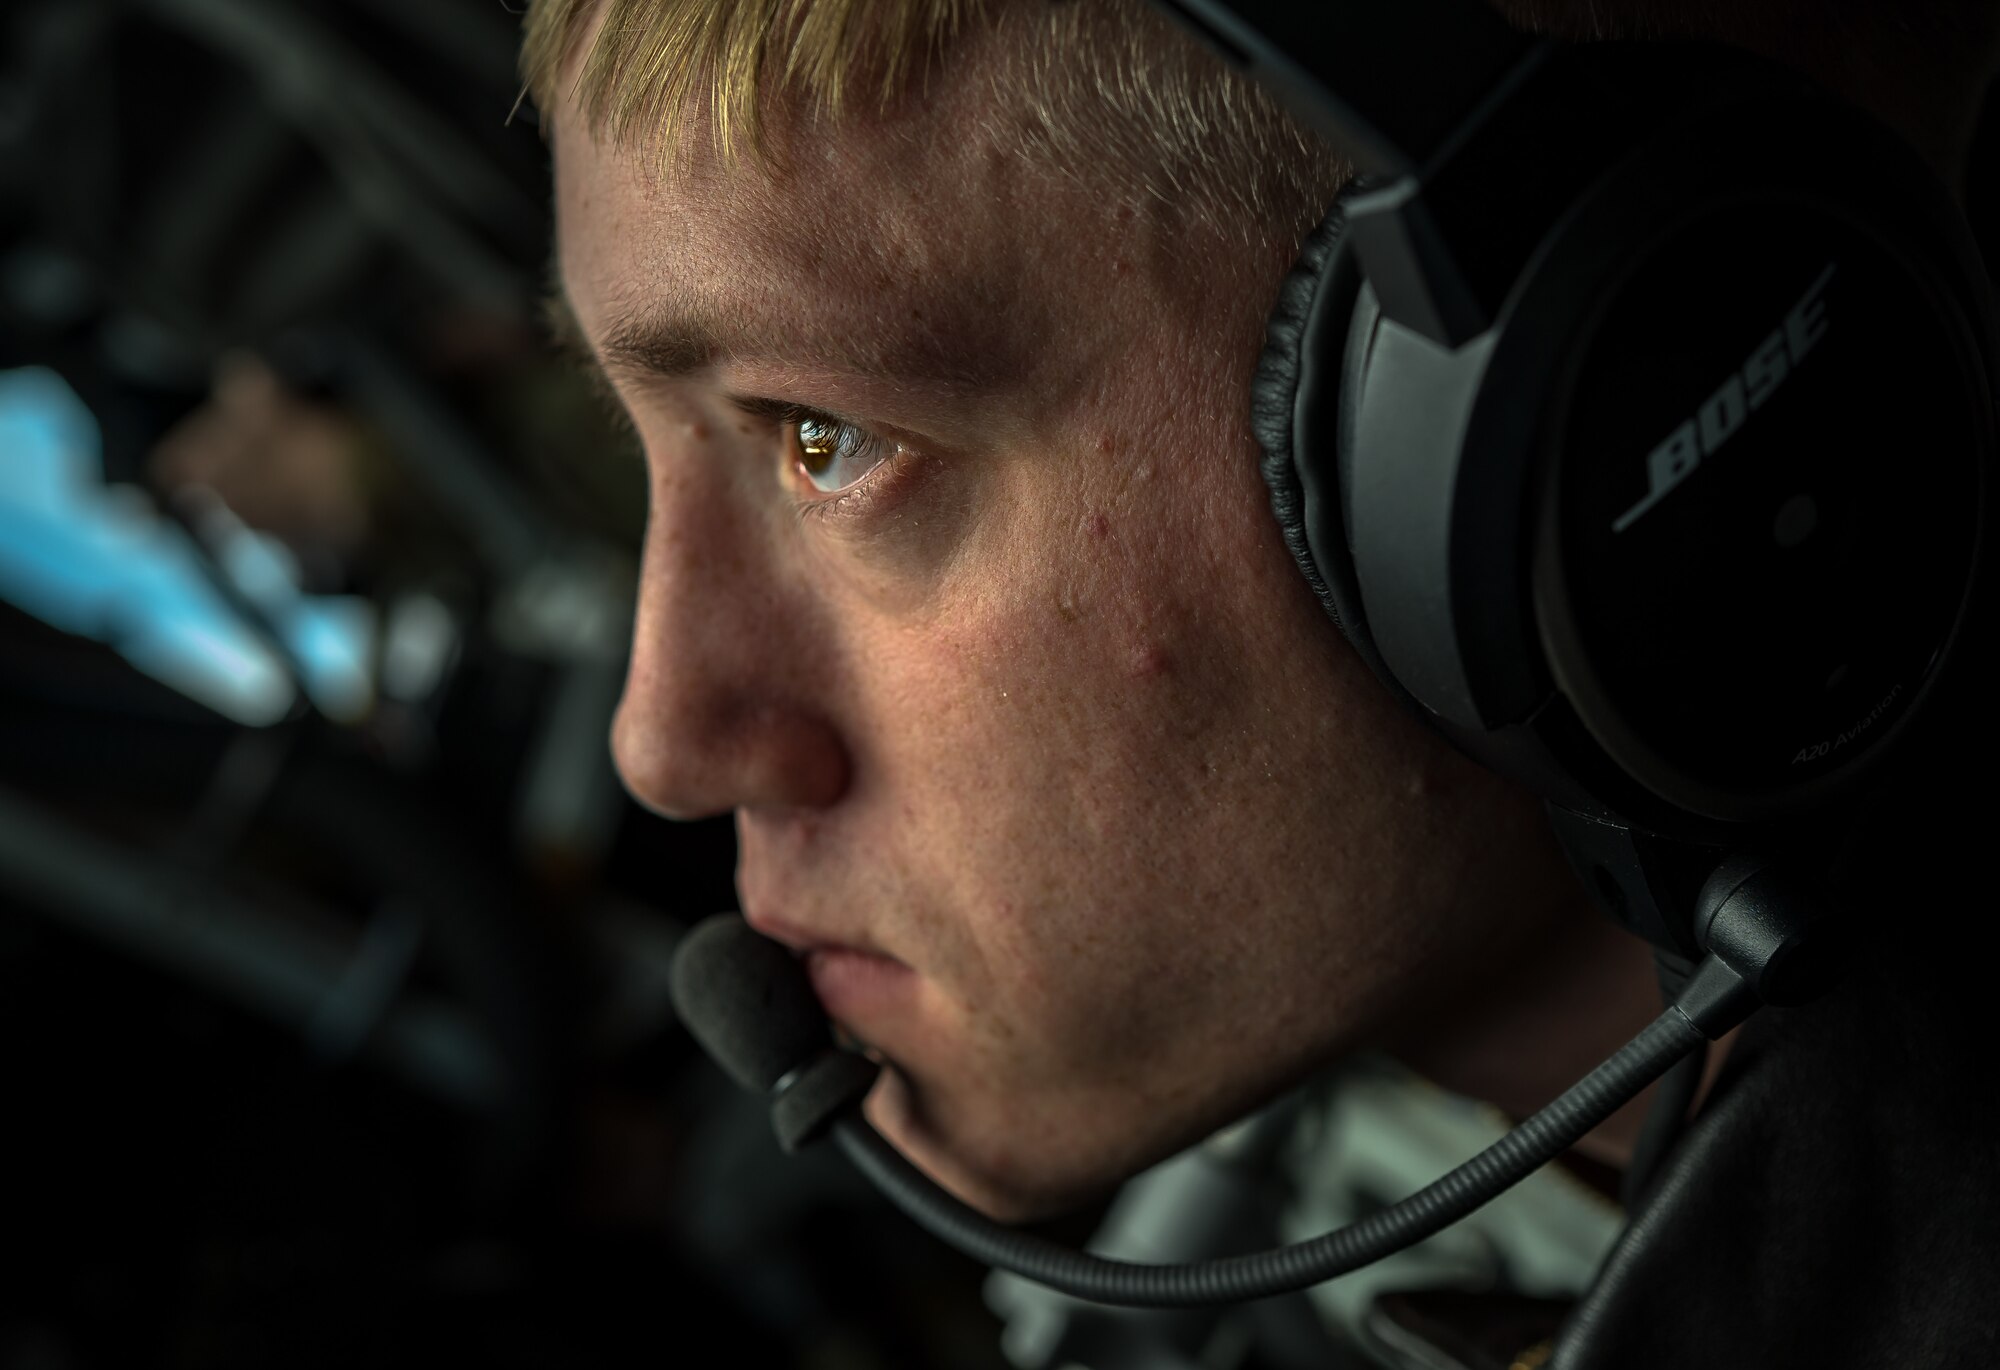 U.S. Air Force Airman 1st Class Noah Rutan, 100th Air Refueling Wing KC-135 Stratotanker boom operator, prepares to refuel a U.S. Air Force B-52 Stratofortress during Bomber Task Force 20-1, Nov. 4, 2019. This deployment allows aircrews and support personnel to conduct theater integration and improve bomber interoperability with joint partners and allied nations. (U.S. Air Force photo by Staff Sgt. Trevor T. McBride)